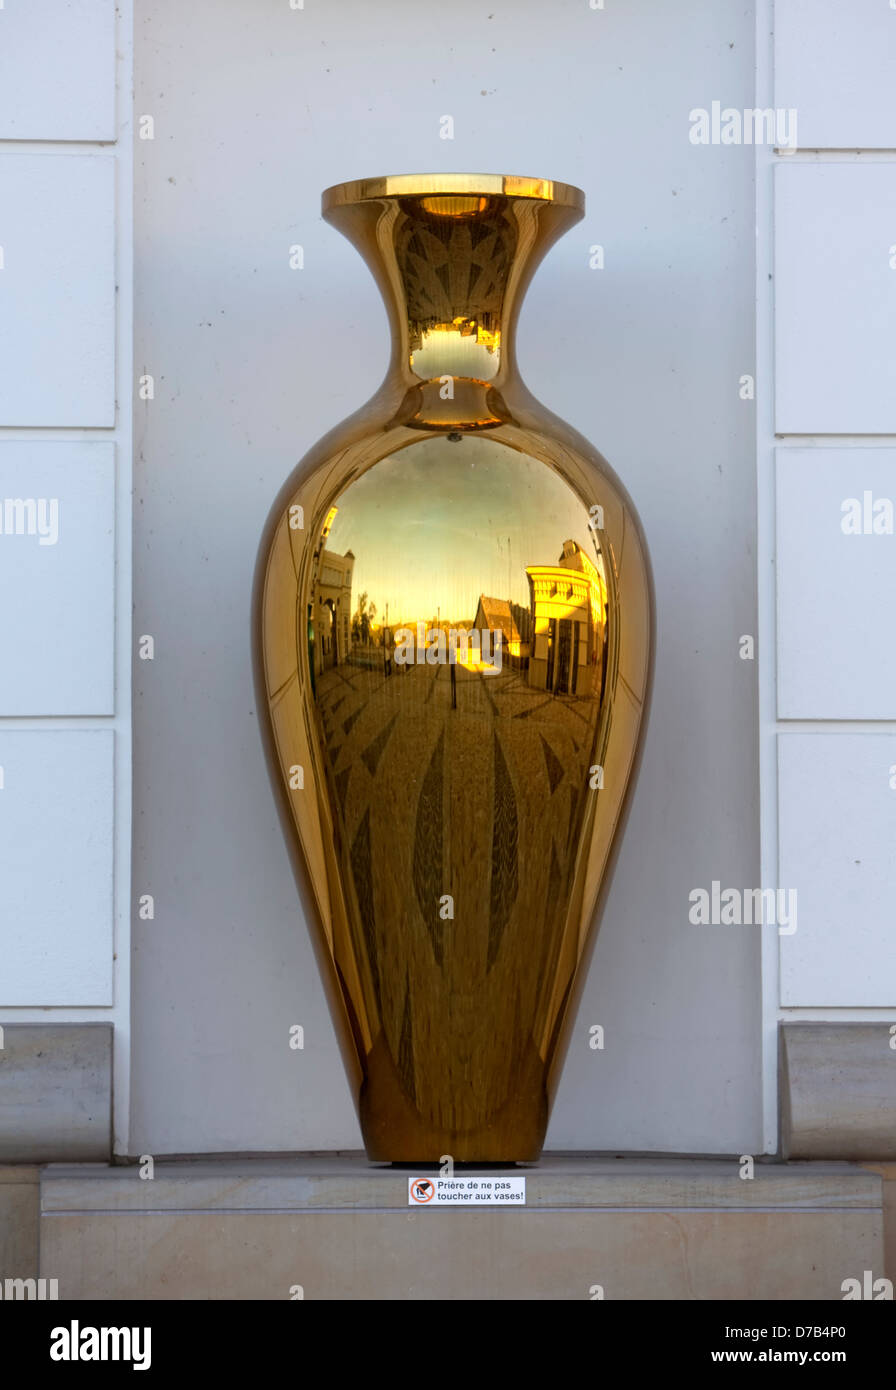 Reflected in a golden vase, the Courthouses of Cite Judiciaire, City of Luxembourg, Luxembourg, Europe Stock Photo